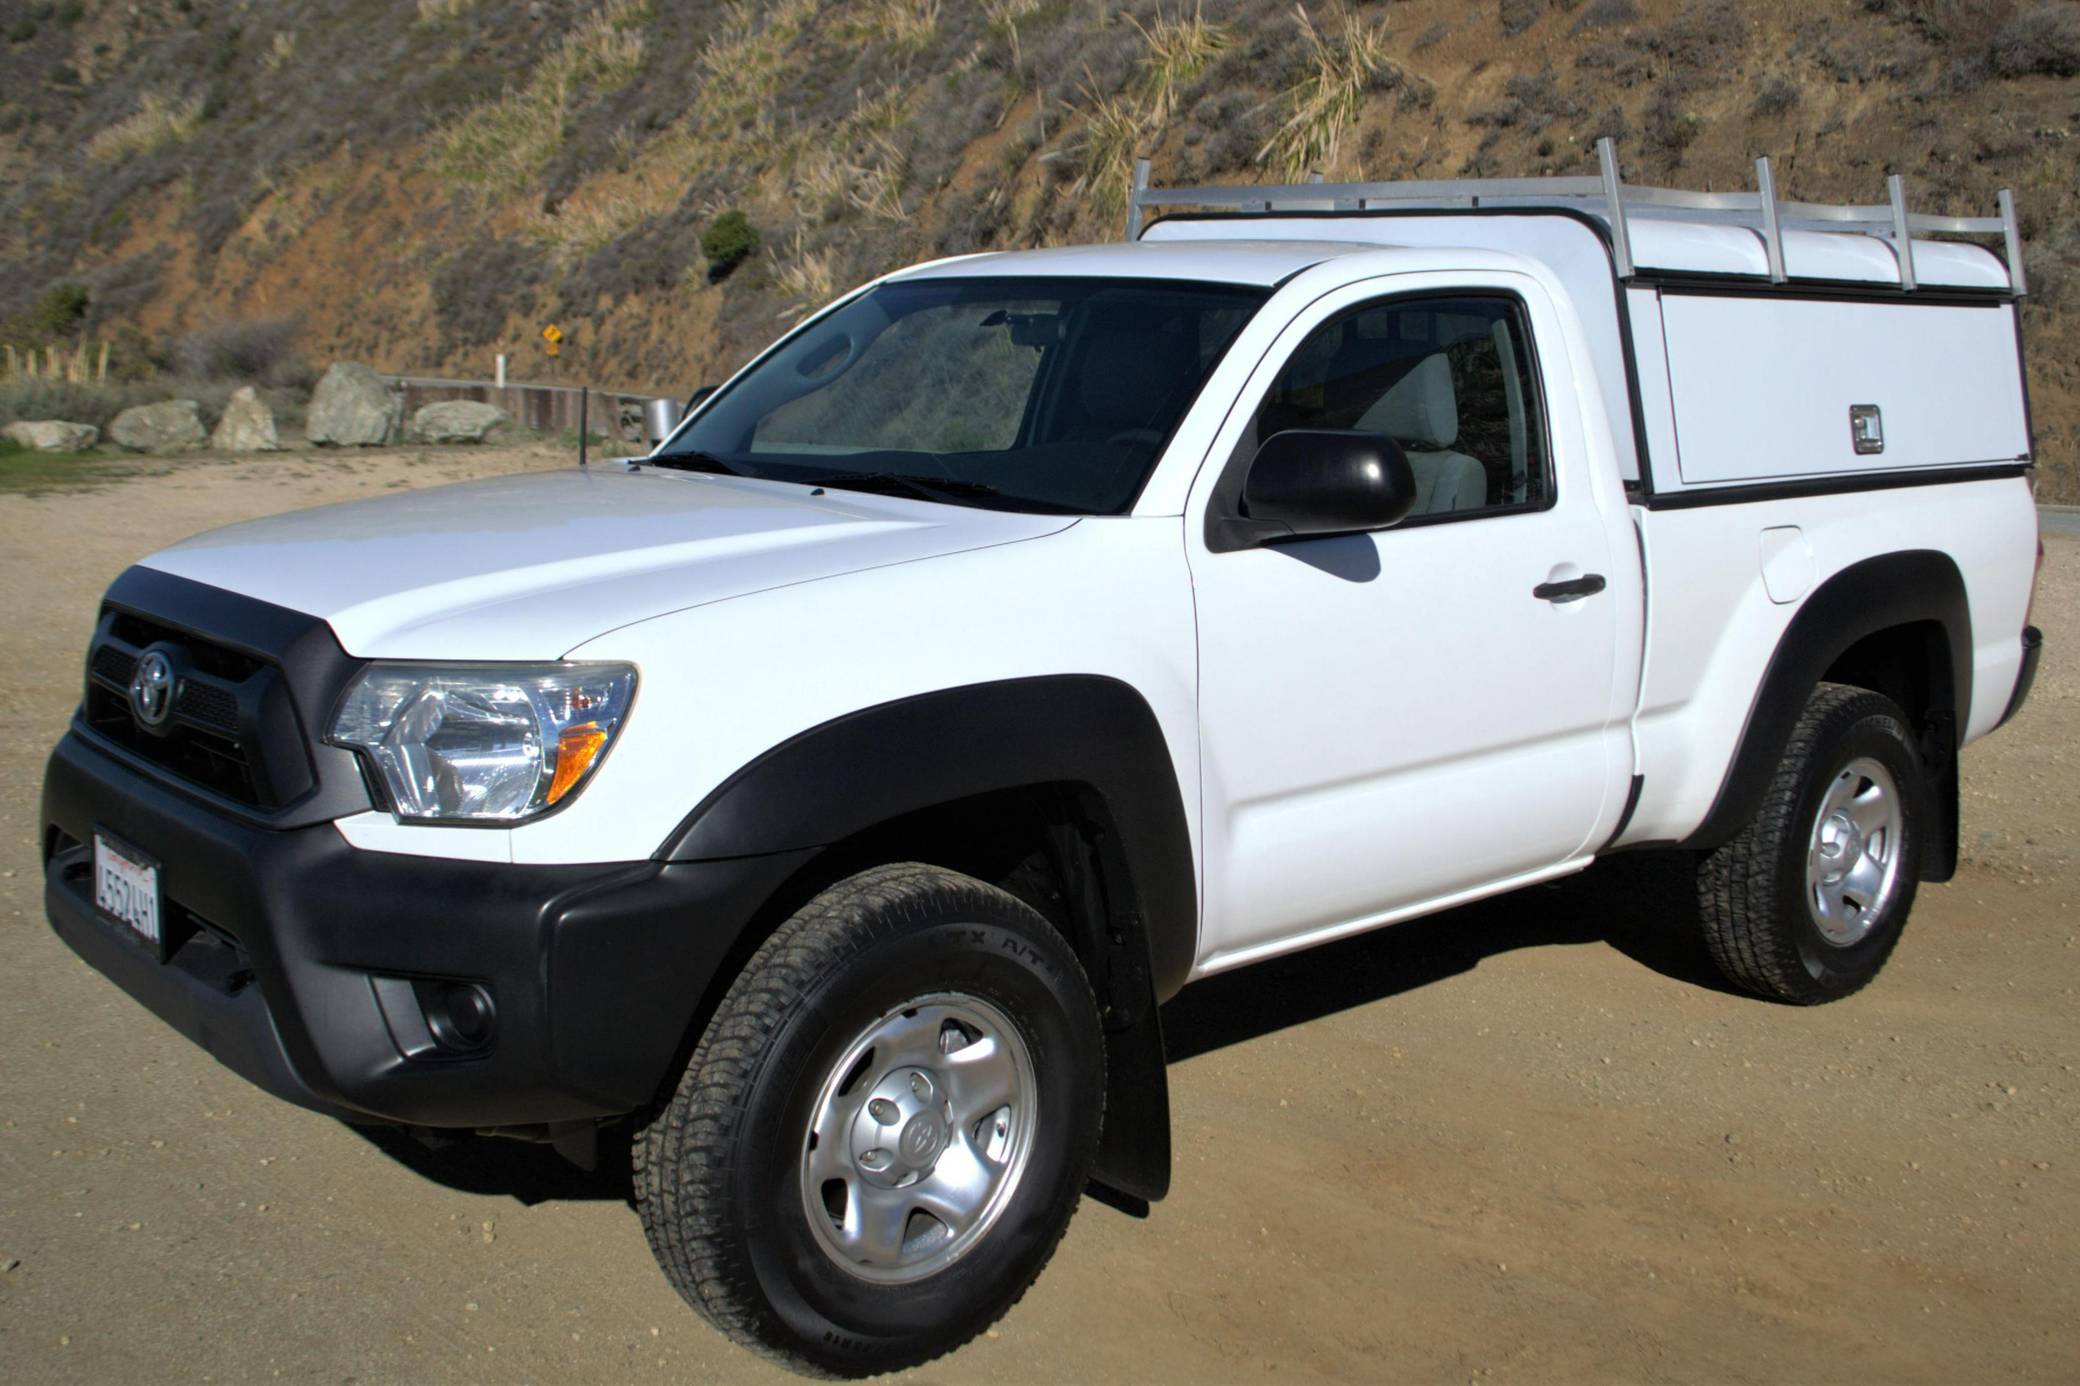 Taco Tuesday: 9 Truck Bed Topper Setups For The Tacoma